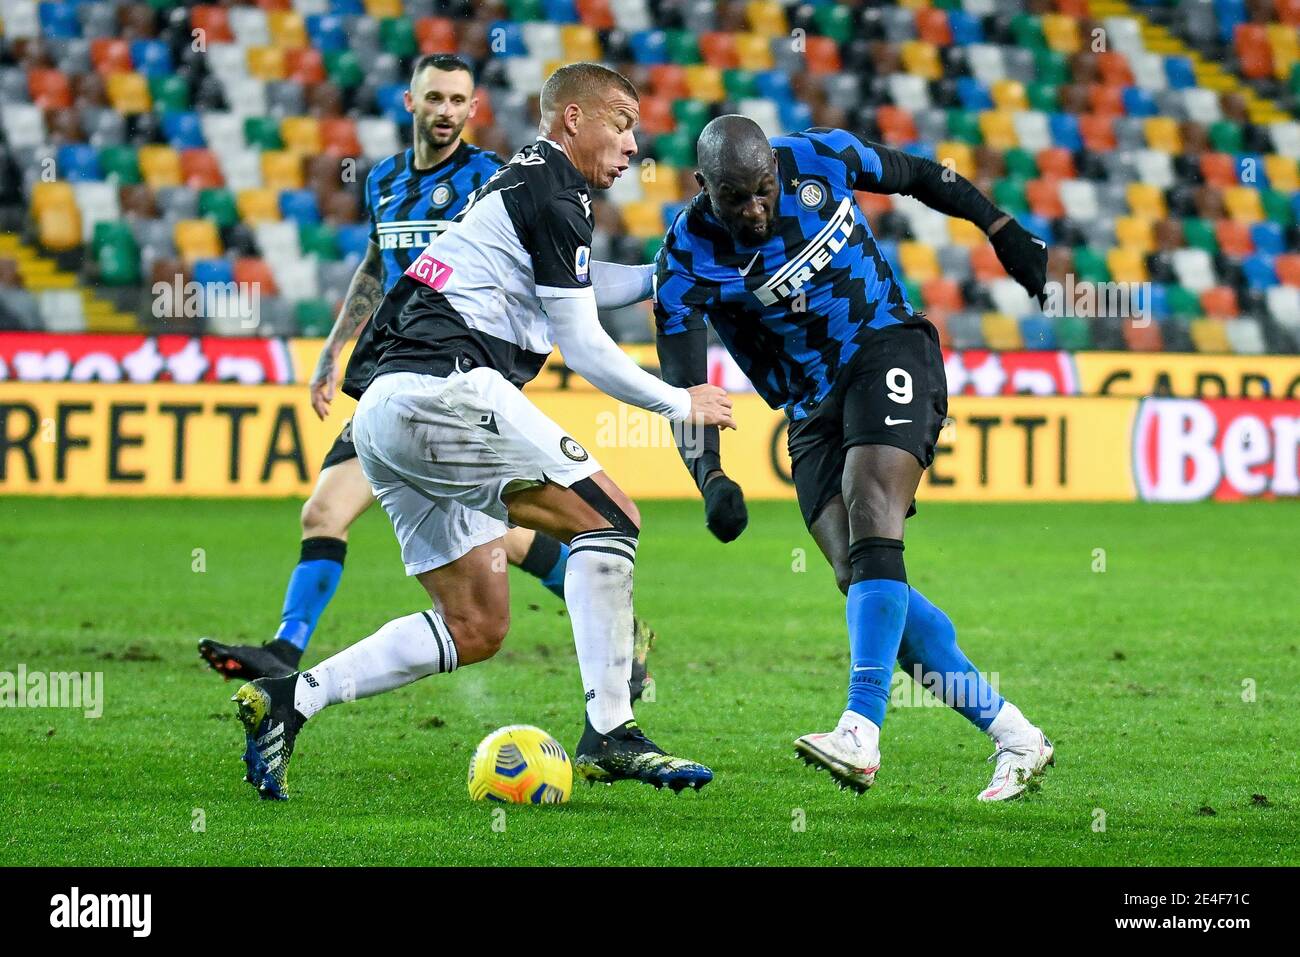 Udine, Italy. 23rd Jan, 2021. Udine, Italy, Friuli - Dacia Arena stadium, January 23, 2021, Romelu Lukaku of Internazionale tries to score a goal hindered by Sebastien De Maio of Udinese during Udinese Calcio vs FC Internazionale - Italian football Serie A match Credit: Ettore Griffoni/LPS/ZUMA Wire/Alamy Live News Stock Photo